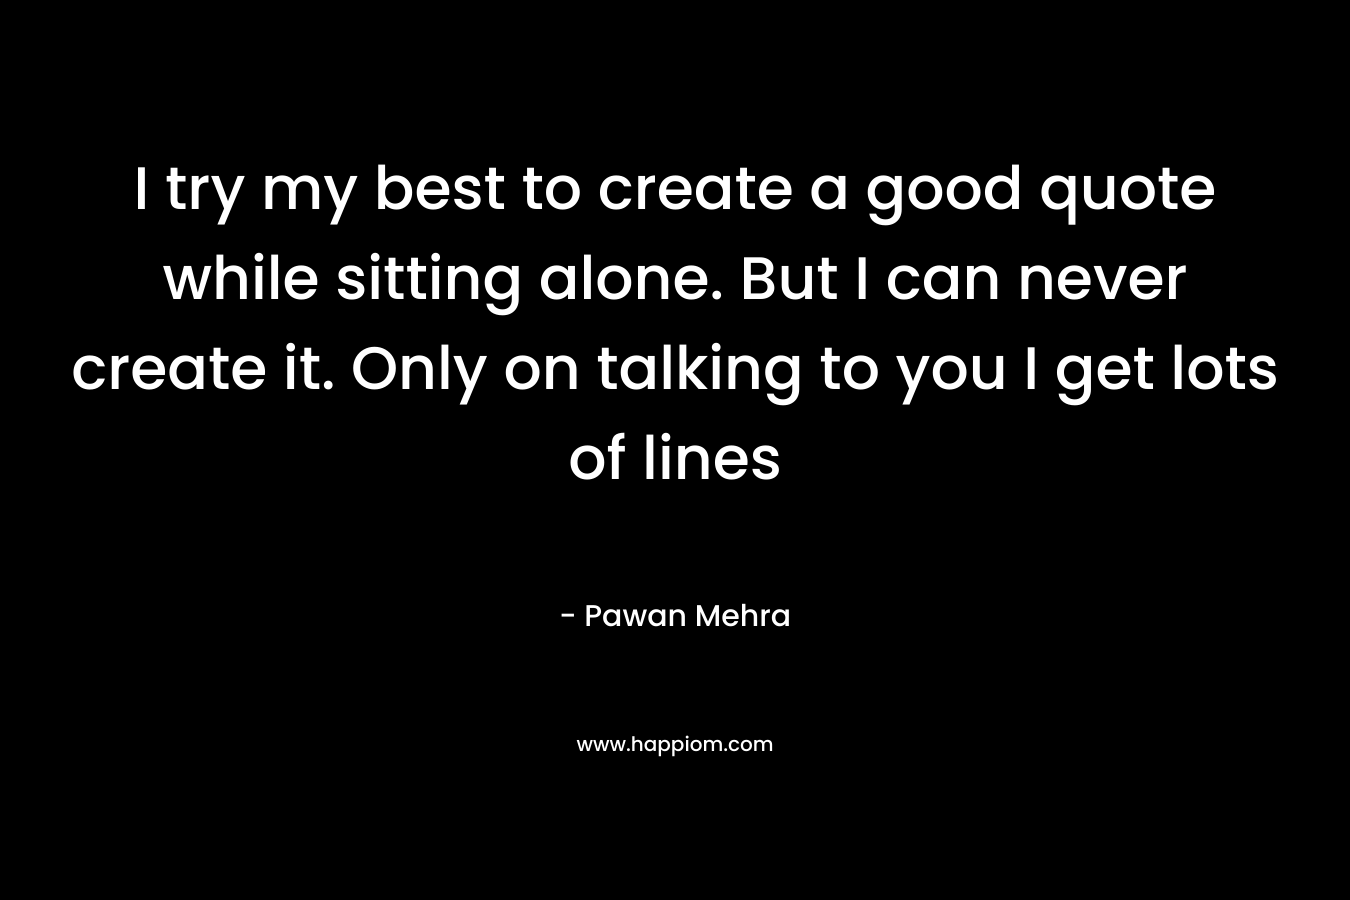 I try my best to create a good quote while sitting alone. But I can never create it. Only on talking to you I get lots of lines